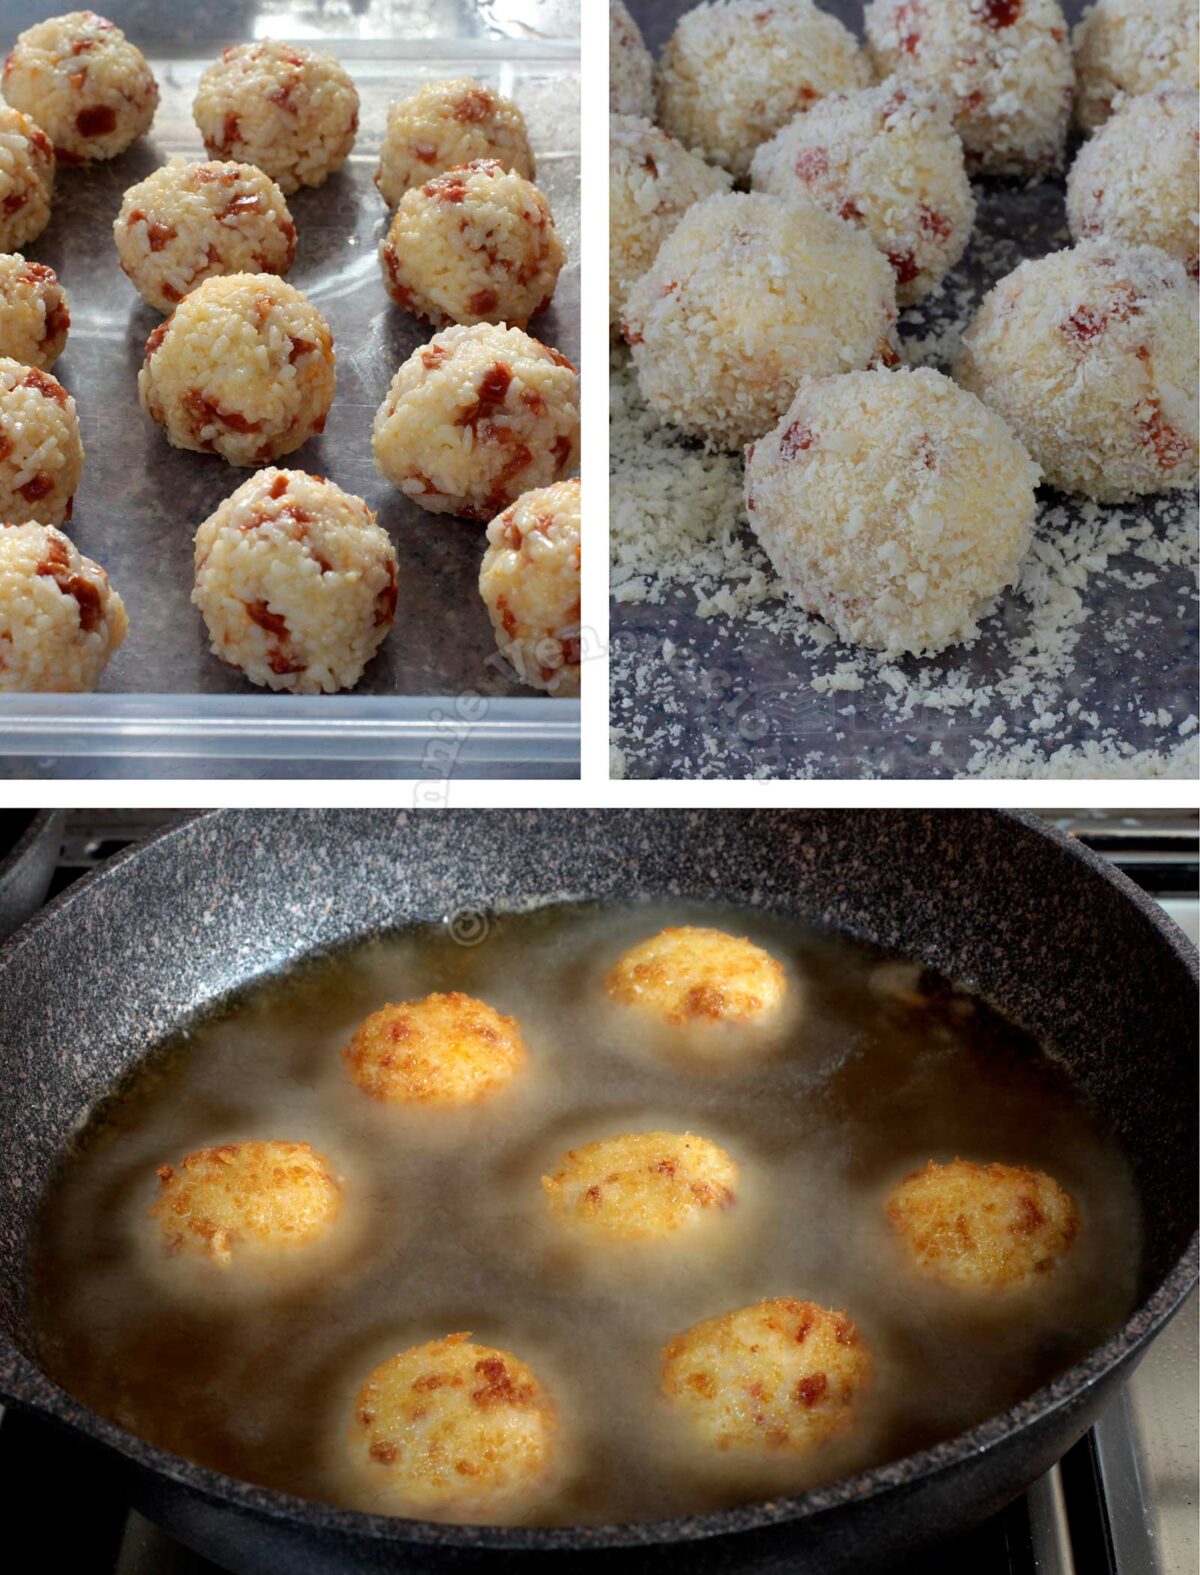 Frying cheese-stuffed rice and sausage balls